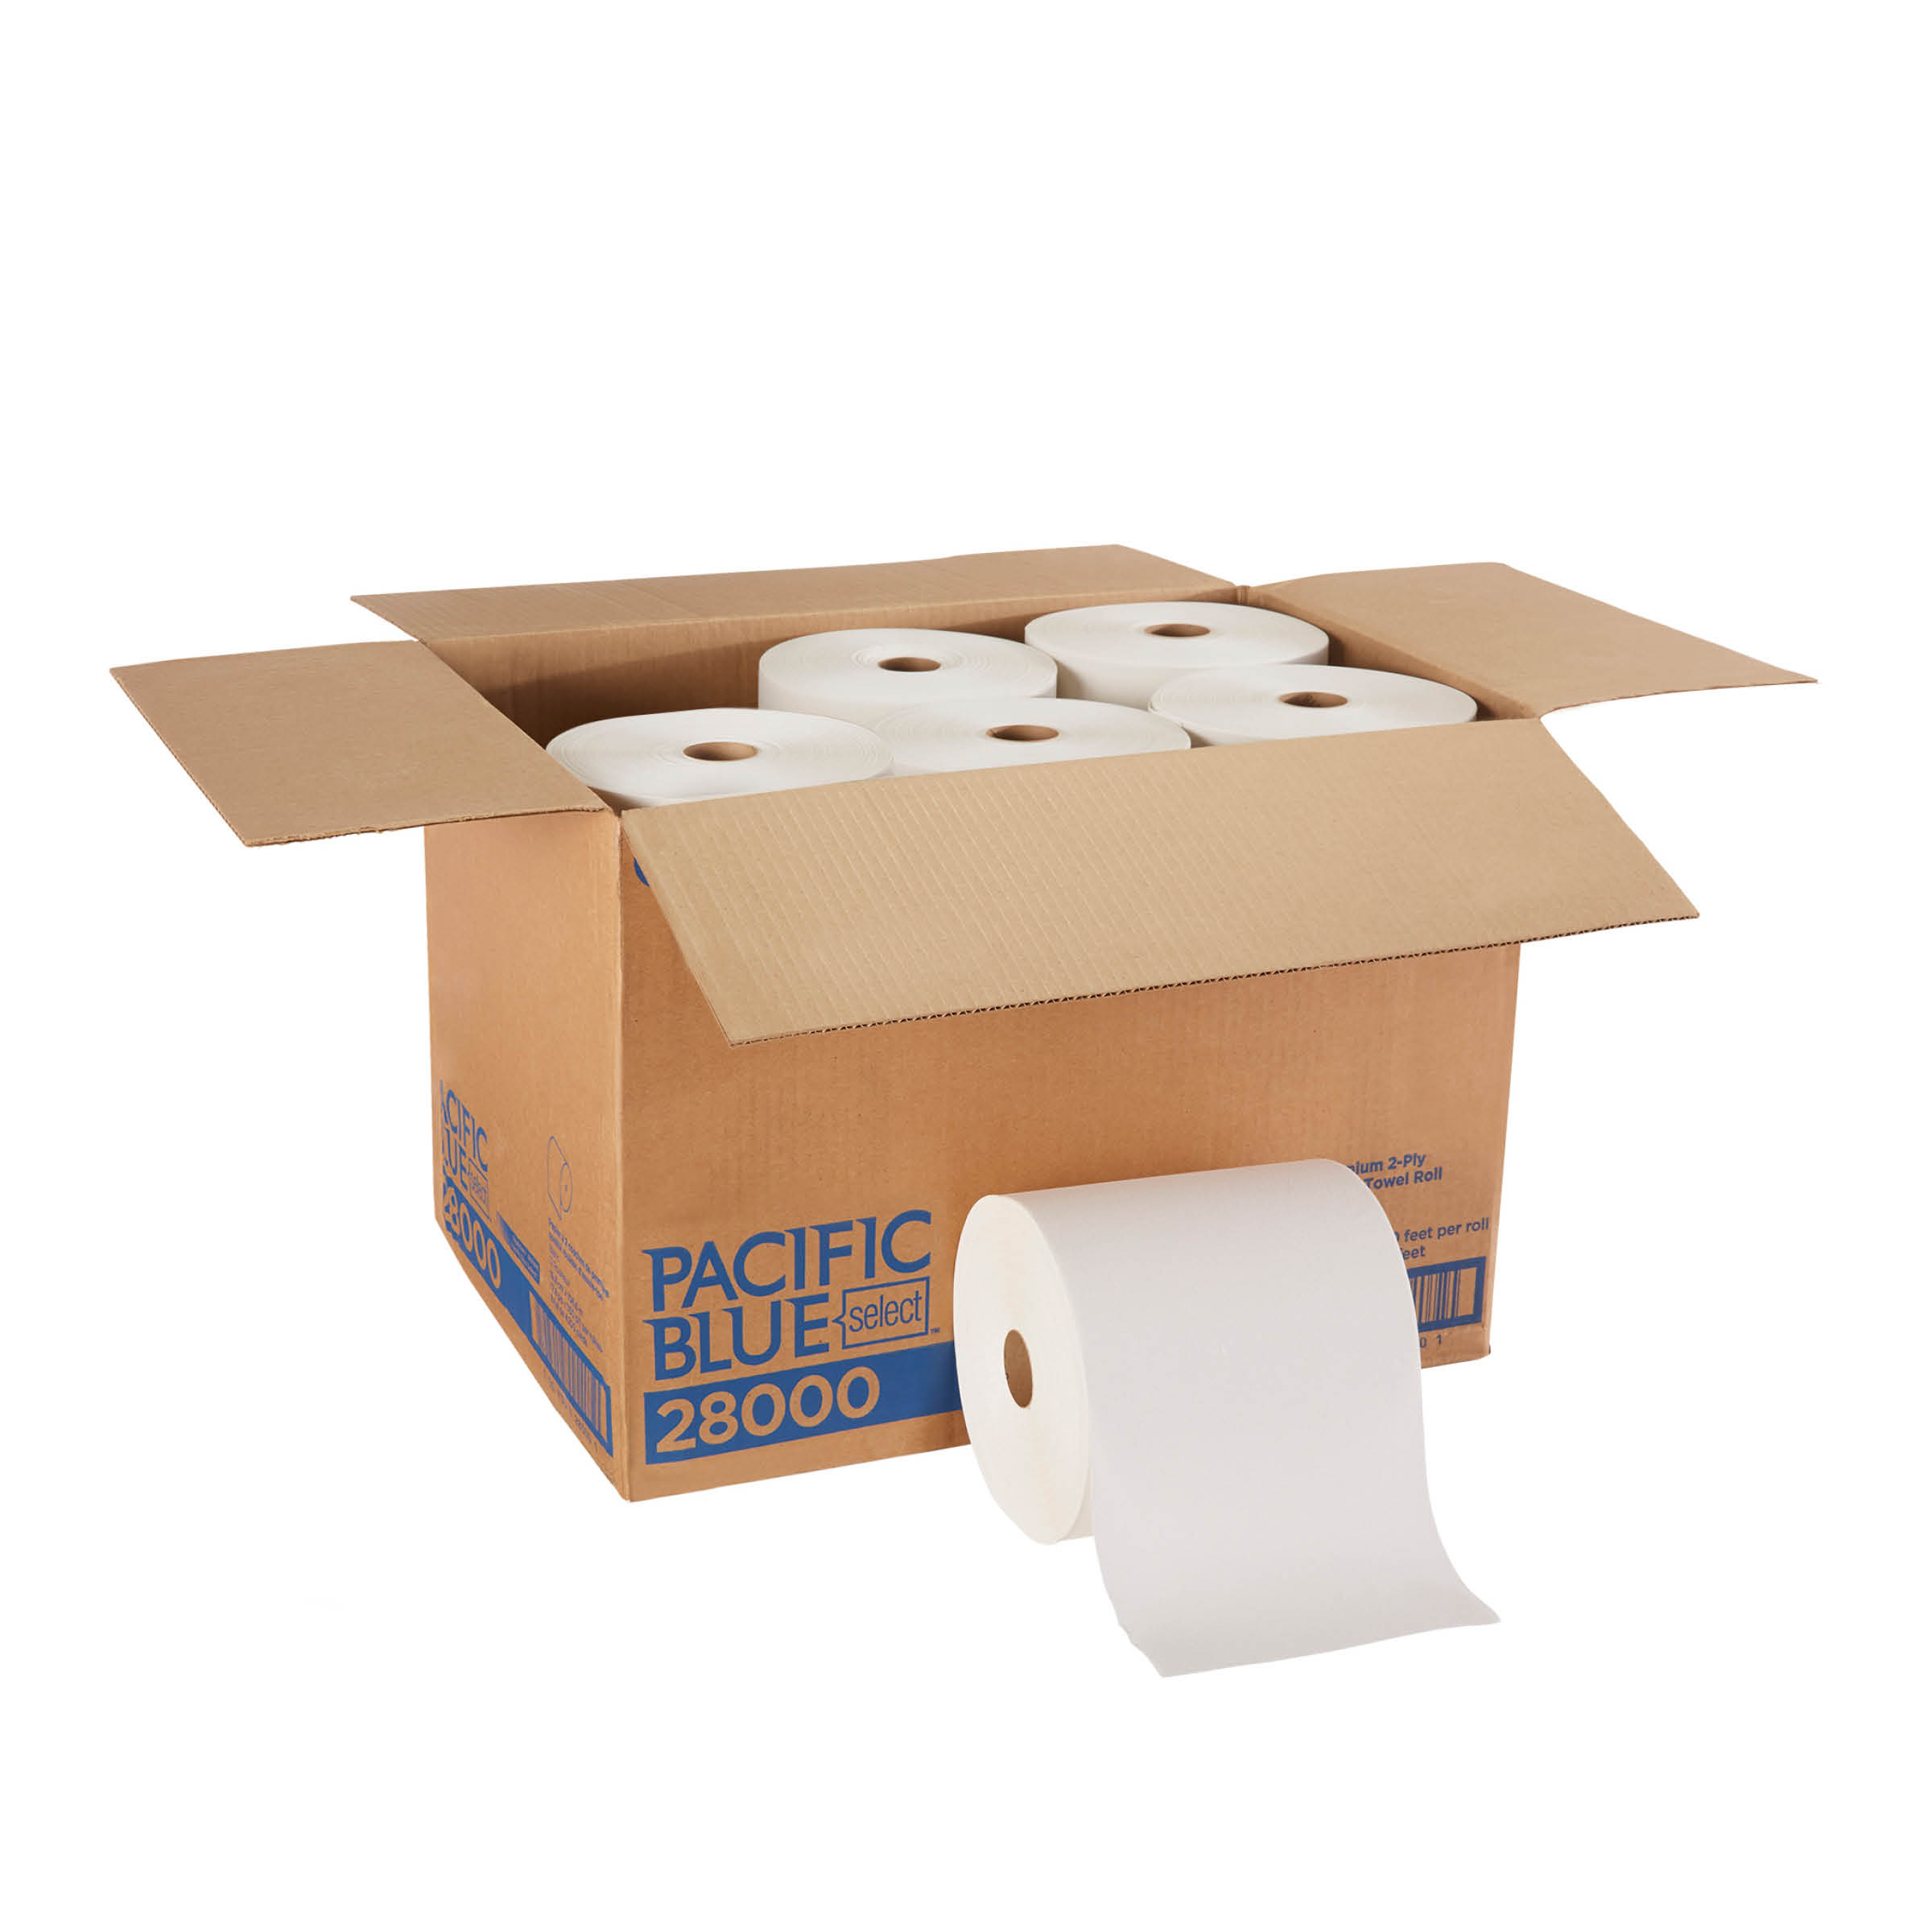 GP PRO Pacific Blue Select Premium 2-Ply Paper Towel Roll, White, 28000, 350 Ft/Roll, 12 Rolls/Case